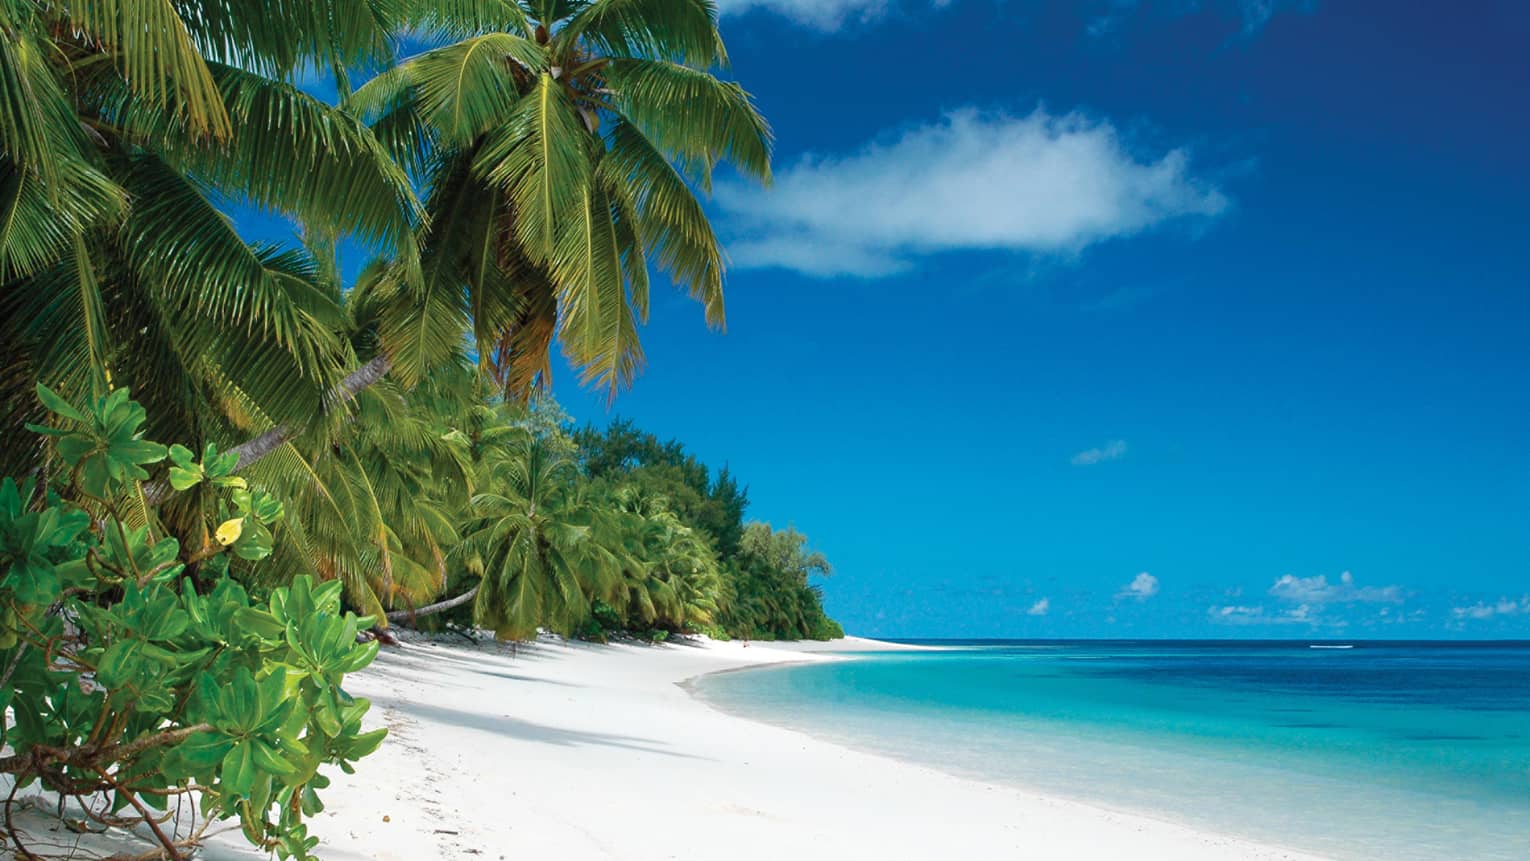 Green  tropical plants and large palms over white sand beach, bright blue ocean